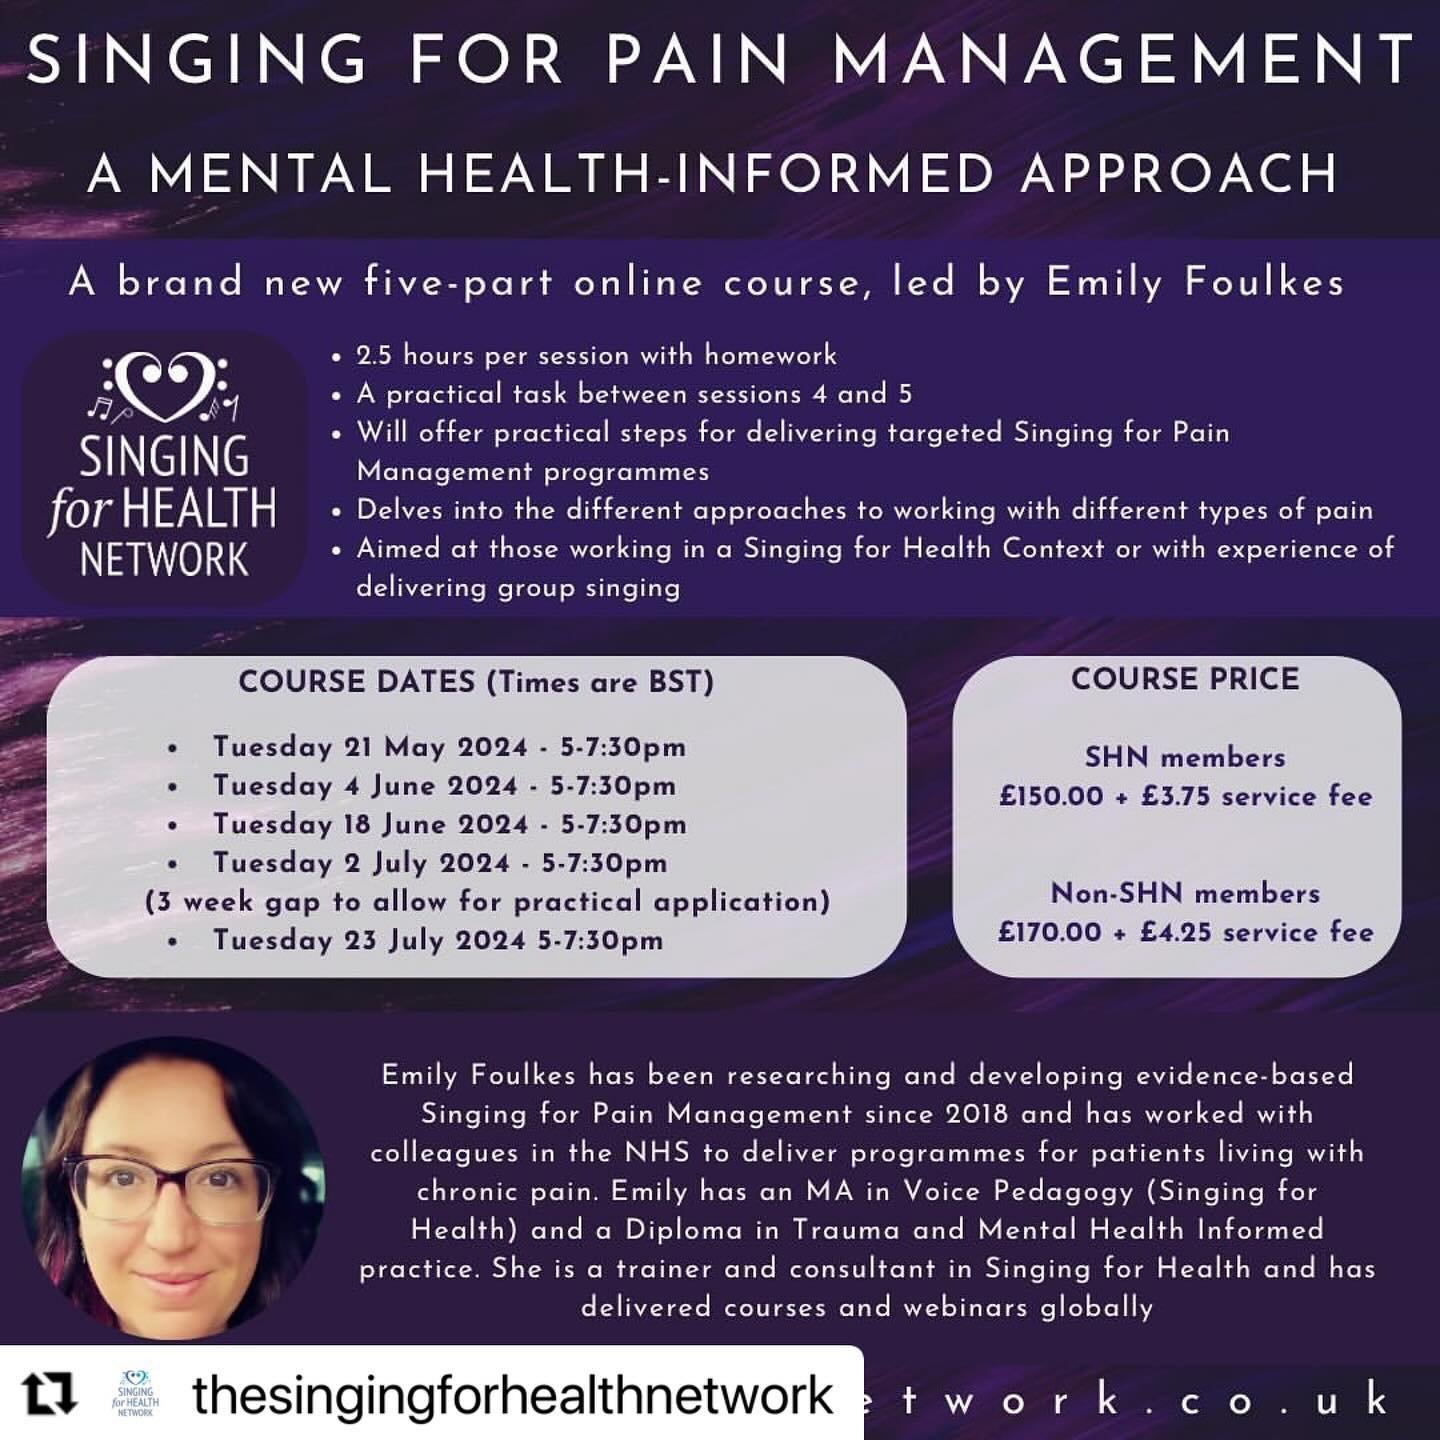 Exciting to see this singing for pain management. I have done Emily&rsquo;s courses on Trauma informed singing, which were fantastic - clear, informative, helpful &amp; well-supported. So I personally highly recommend this! Ruth 🤗
・・・
We are absolut